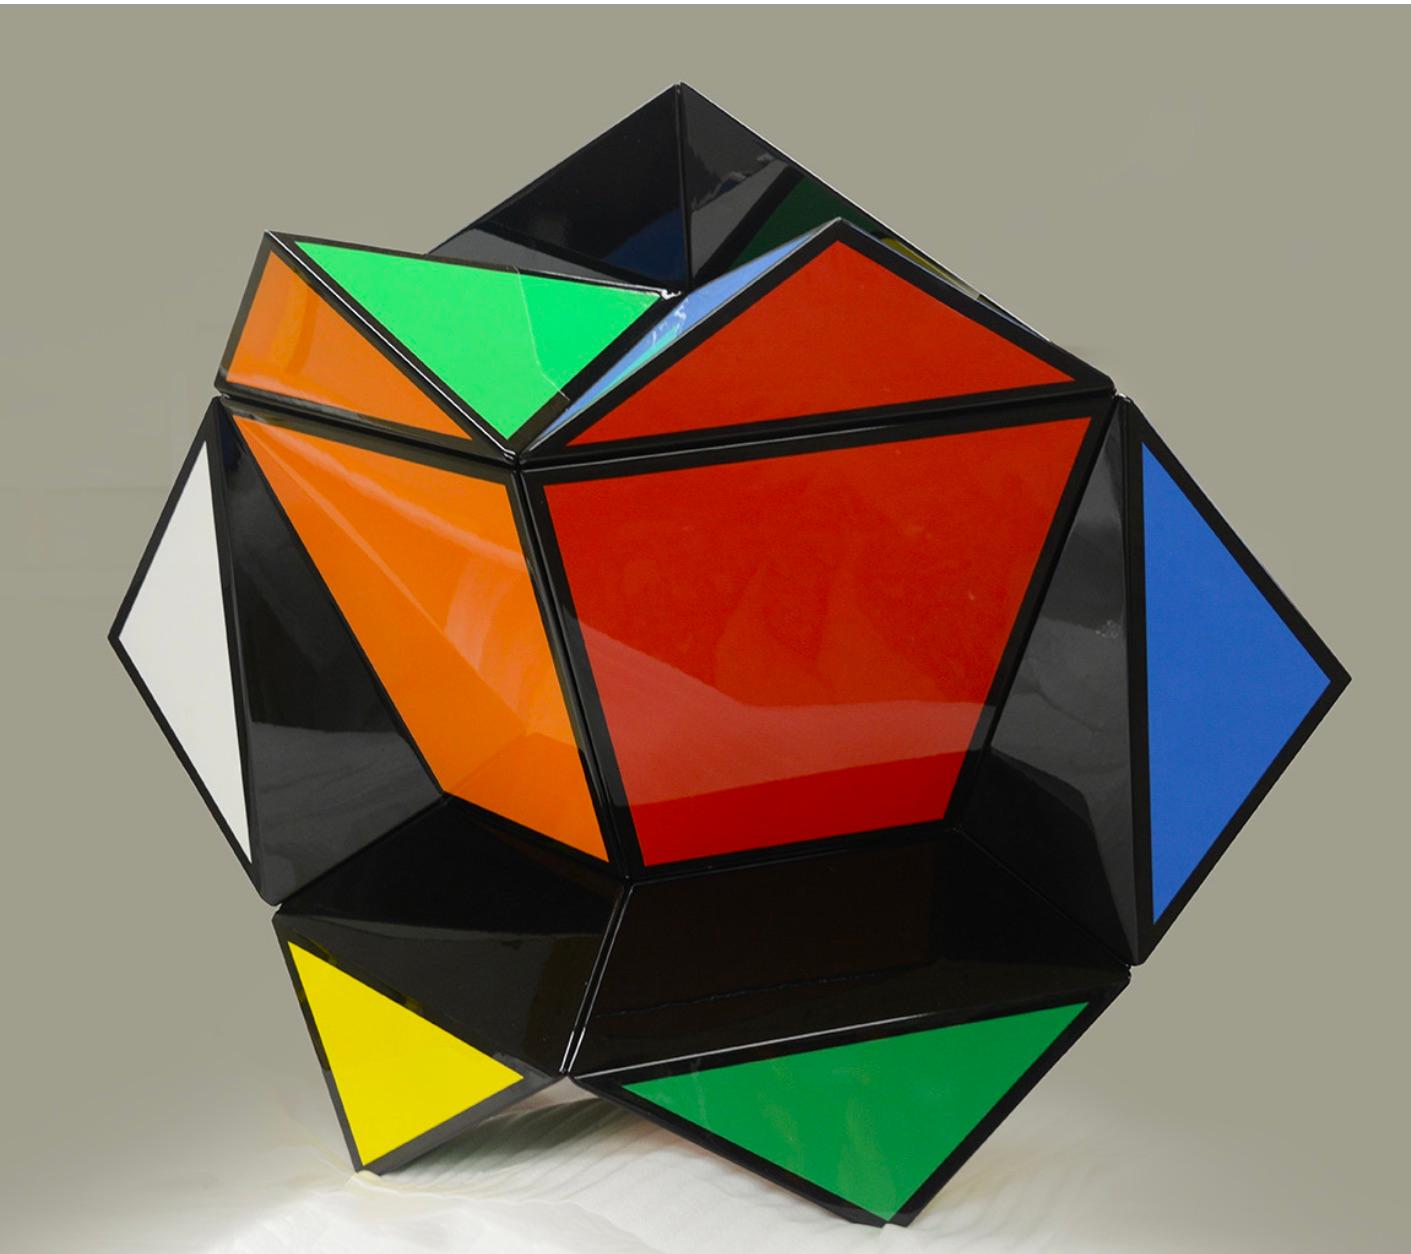 Magic Cube 3.1.1 - Abstract Geometric Sculpture by Jannis Markopoulos